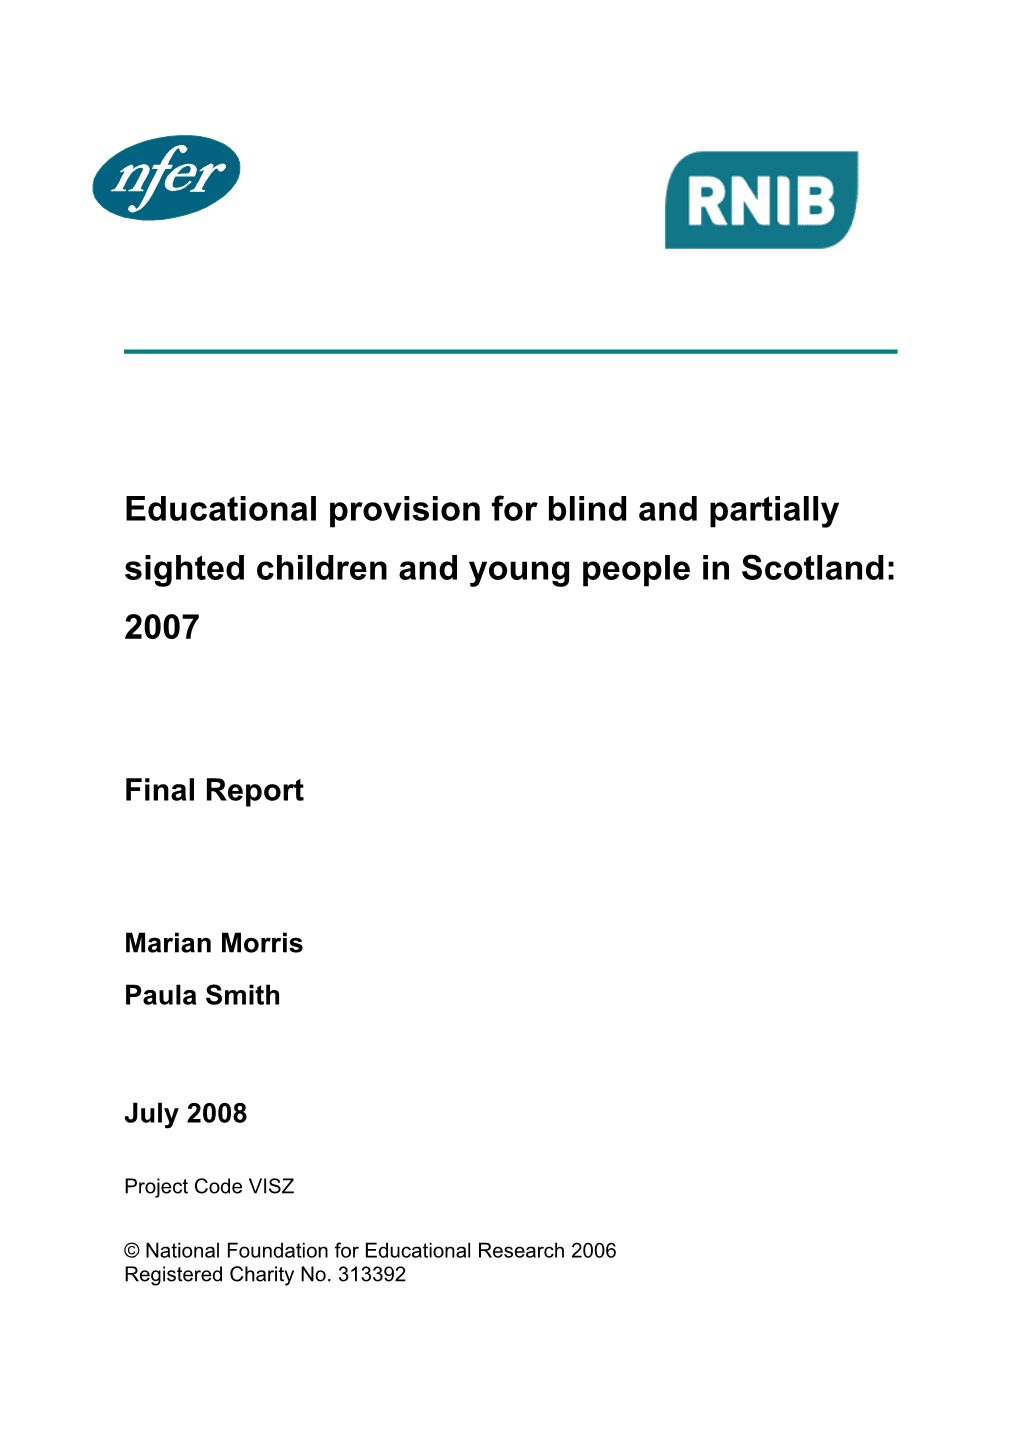 Educational Provision for Blind and Partially Sighted Children and Young People in Scotland